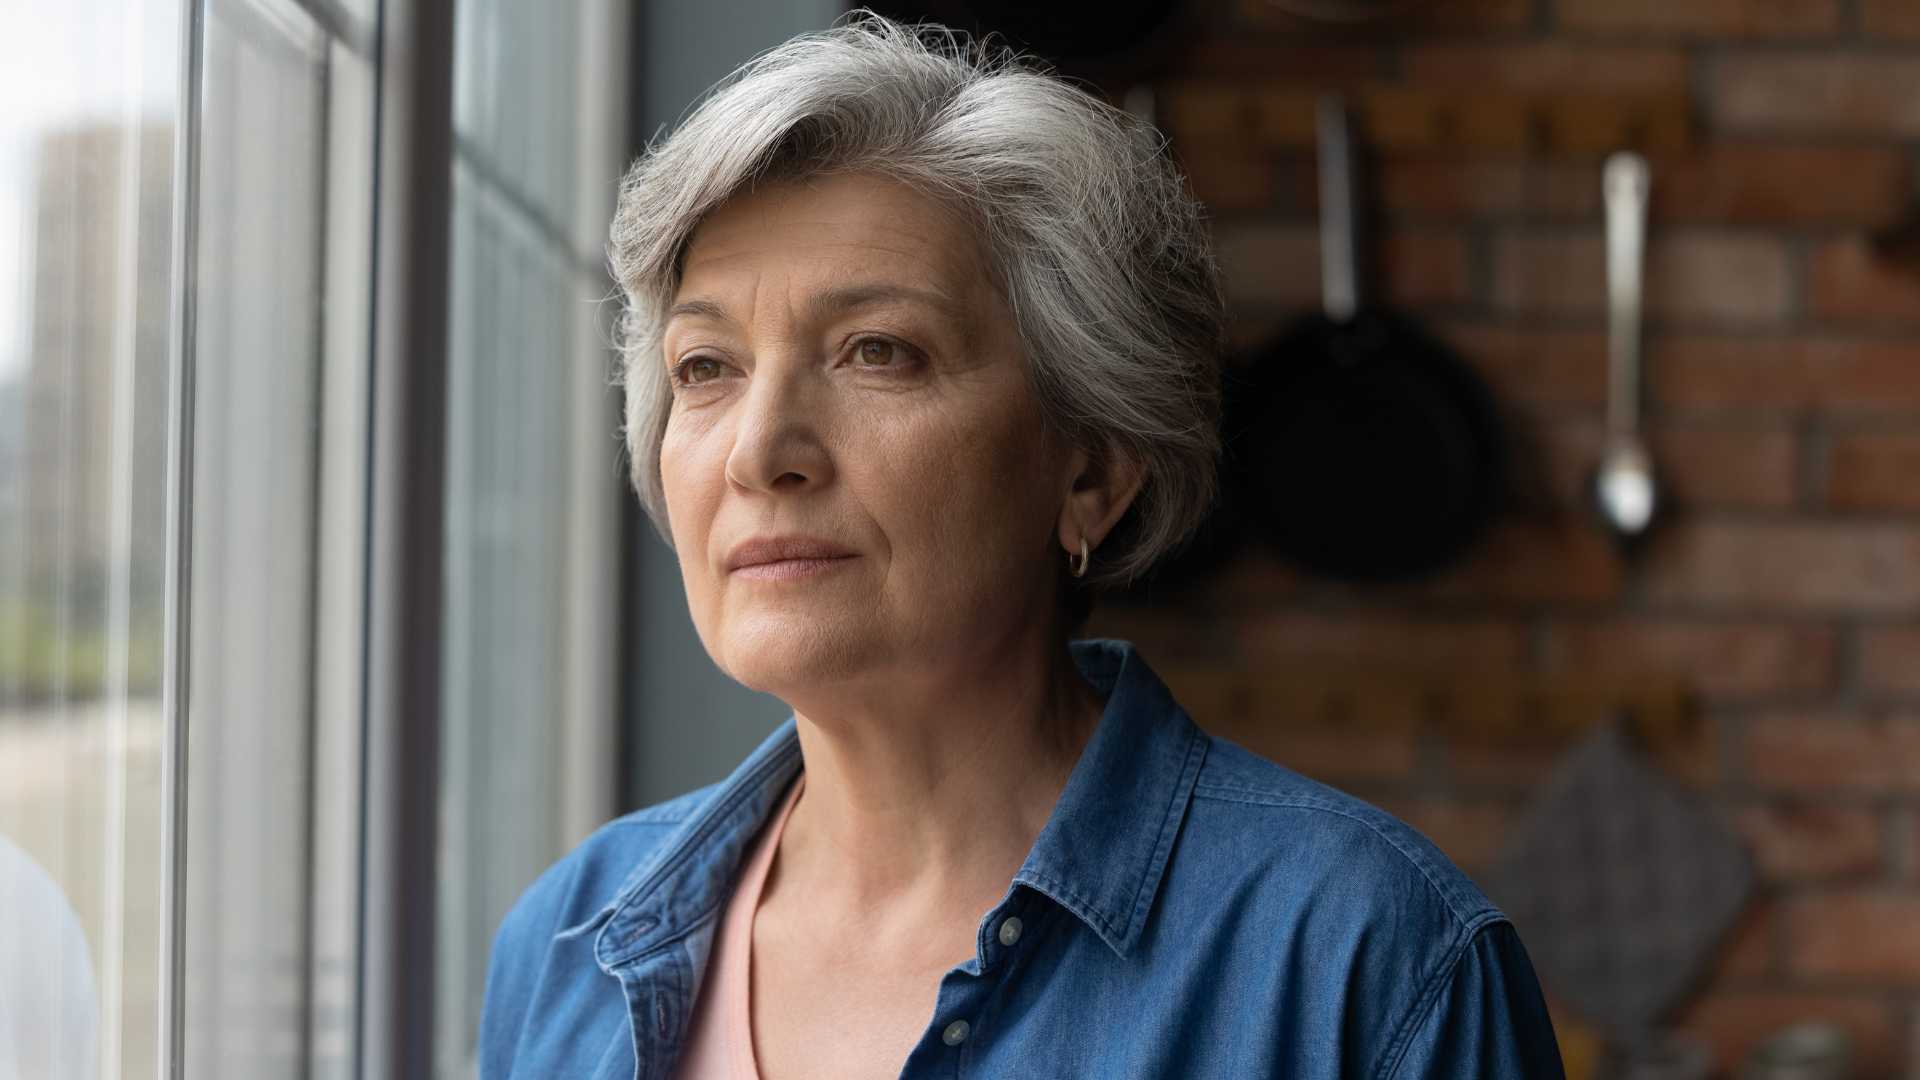 Older woman looking out window with solemn expression